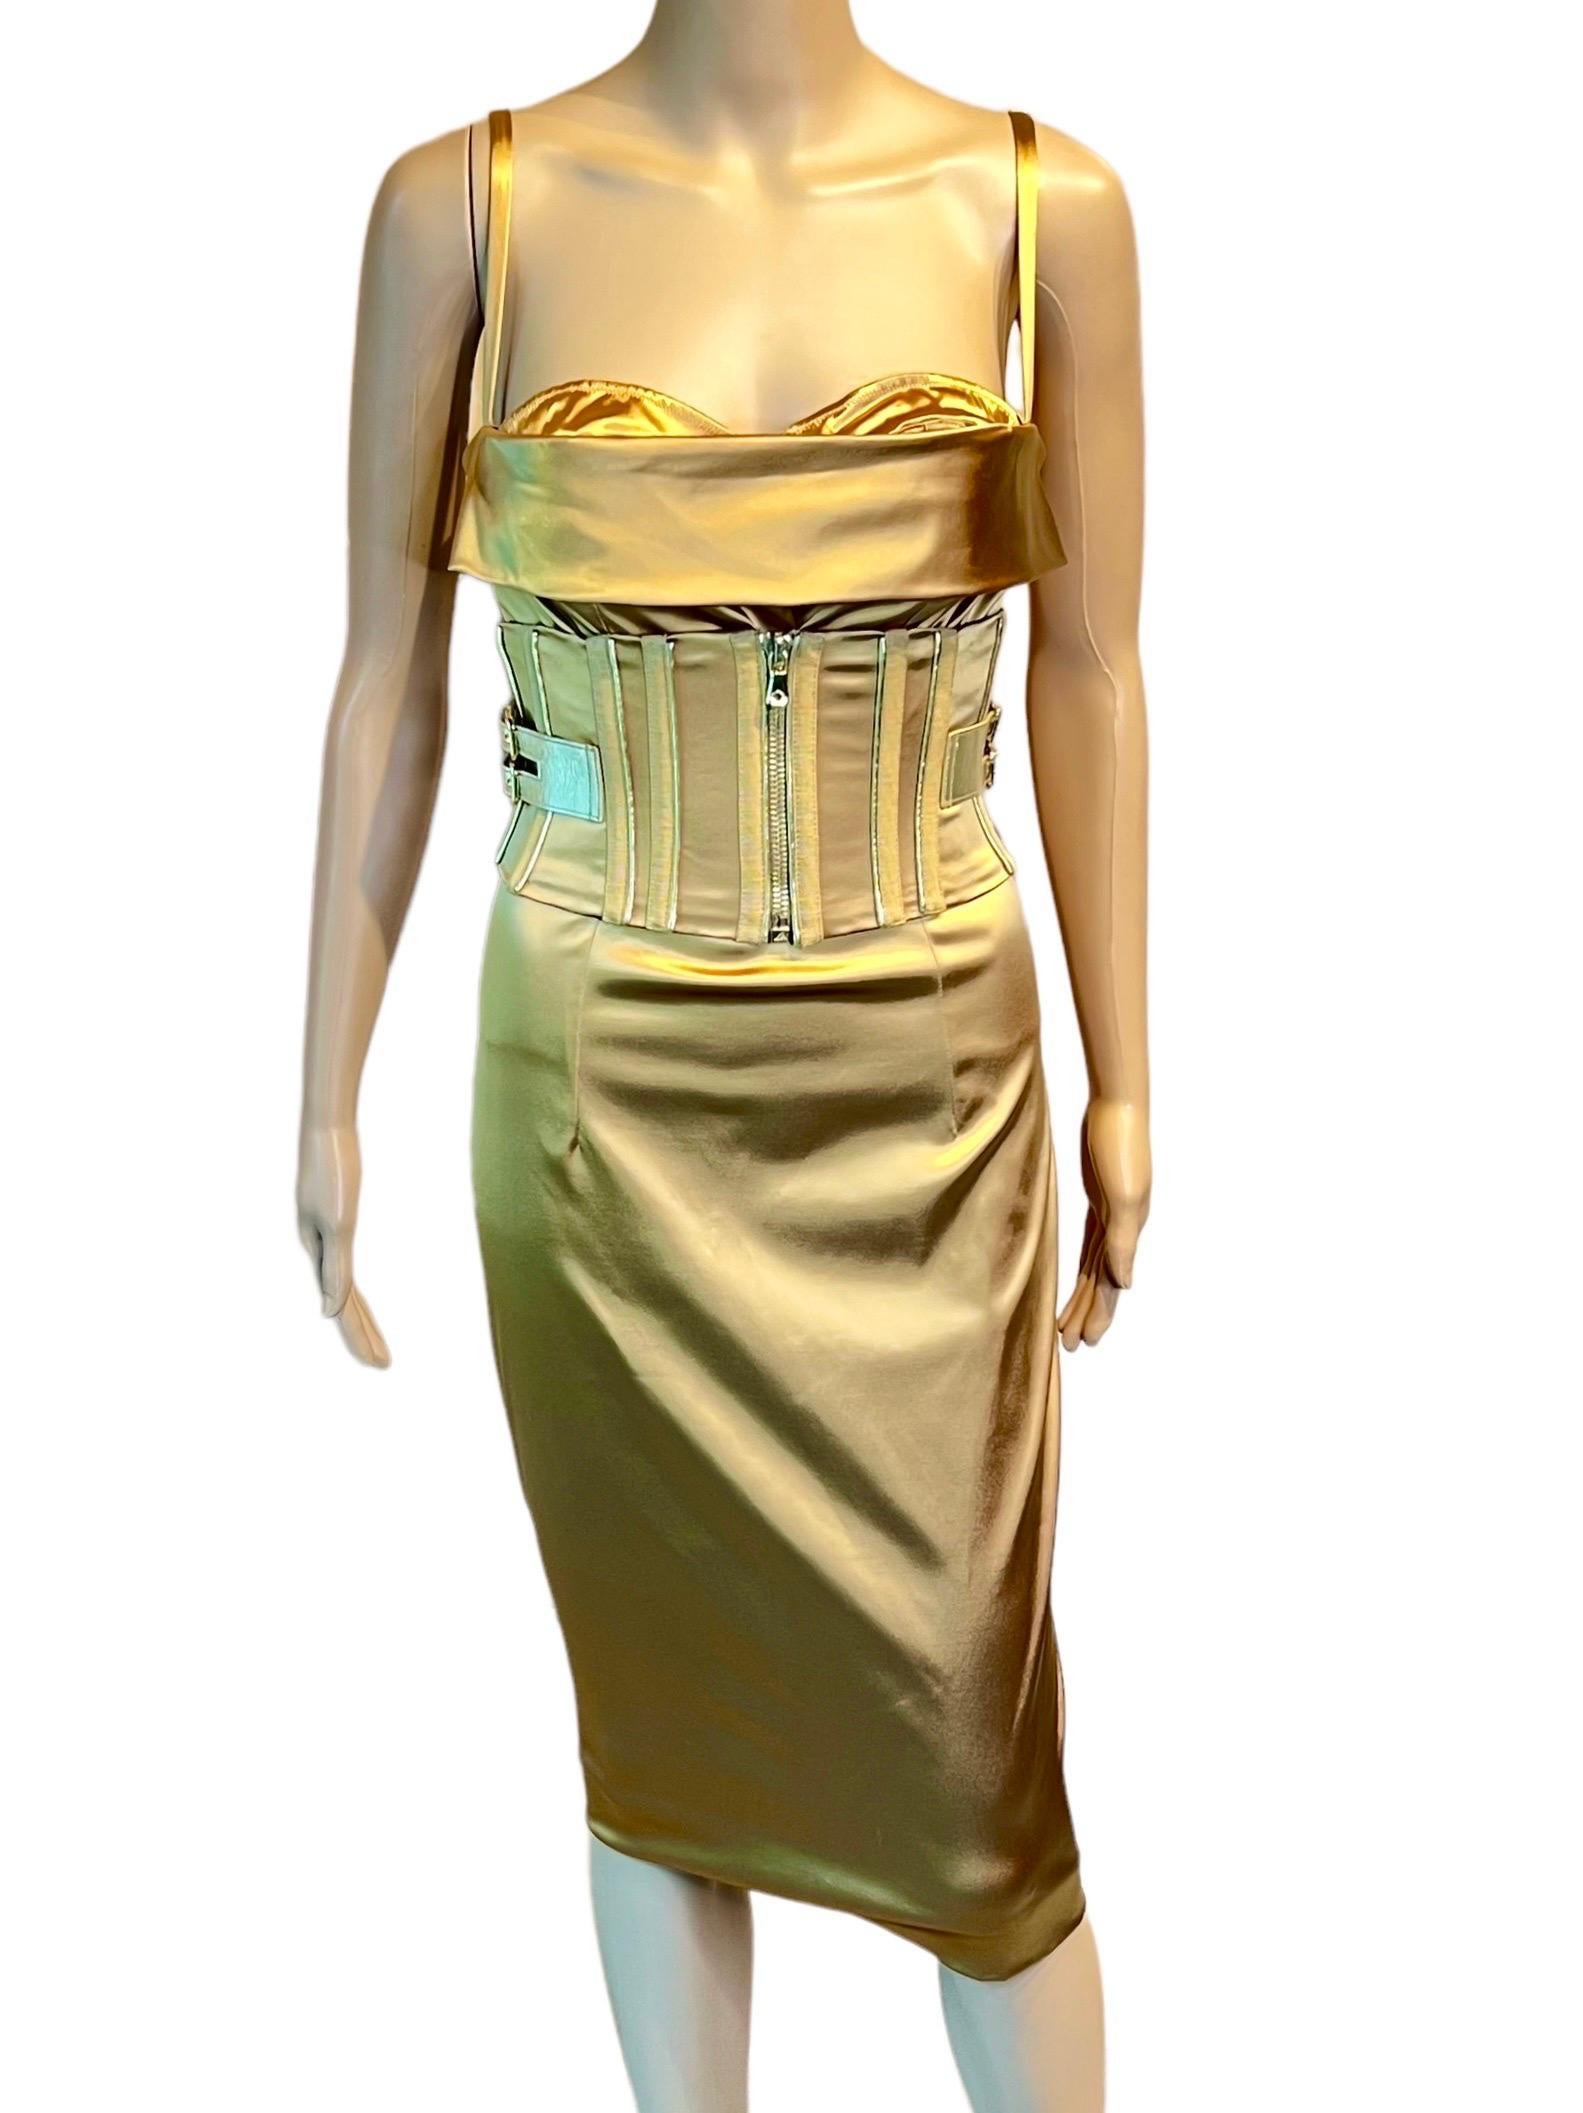 Brown Dolce & Gabbana S/S 2007 Corset Belted Bra Bustier Bodycon Gold Acetate Dress For Sale